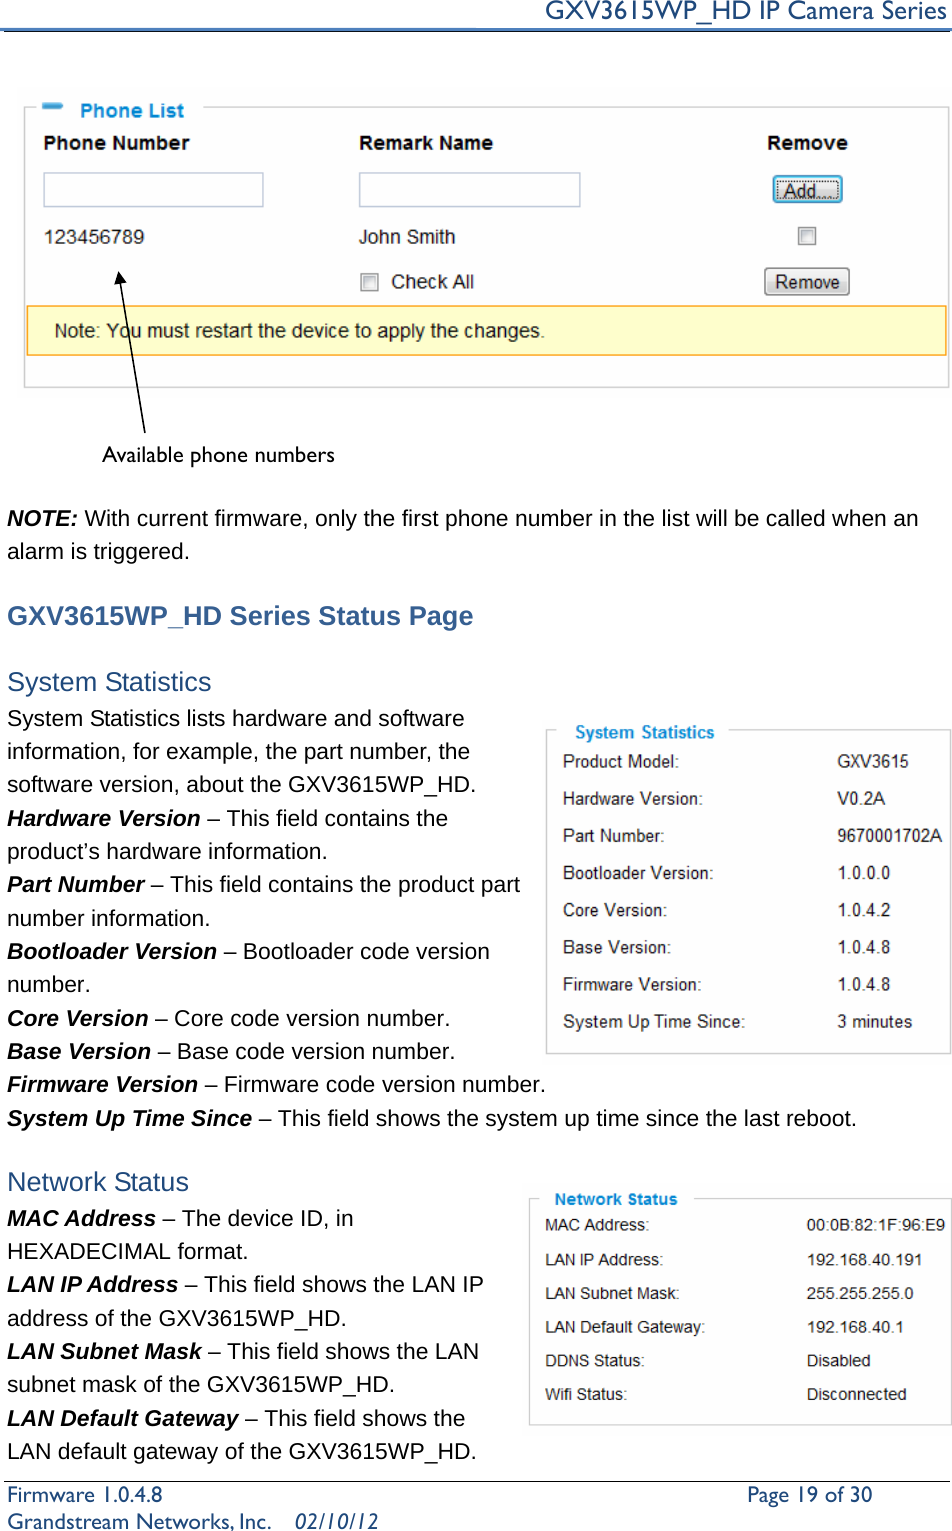     GXV3615WP_HD IP Camera Series Firmware 1.0.4.8                                                   Page 19 of 30     Grandstream Networks, Inc.  02/10/12     NOTE: With current firmware, only the first phone number in the list will be called when an alarm is triggered.      GXV3615WP_HD Series Status Page  System Statistics   System Statistics lists hardware and software information, for example, the part number, the software version, about the GXV3615WP_HD. Hardware Version – This field contains the product’s hardware information.   Part Number – This field contains the product part number information. Bootloader Version – Bootloader code version number. Core Version – Core code version number. Base Version – Base code version number. Firmware Version – Firmware code version number. System Up Time Since – This field shows the system up time since the last reboot.  Network Status MAC Address – The device ID, in HEXADECIMAL format. LAN IP Address – This field shows the LAN IP address of the GXV3615WP_HD. LAN Subnet Mask – This field shows the LAN subnet mask of the GXV3615WP_HD. LAN Default Gateway – This field shows the LAN default gateway of the GXV3615WP_HD. Available phone numbers   